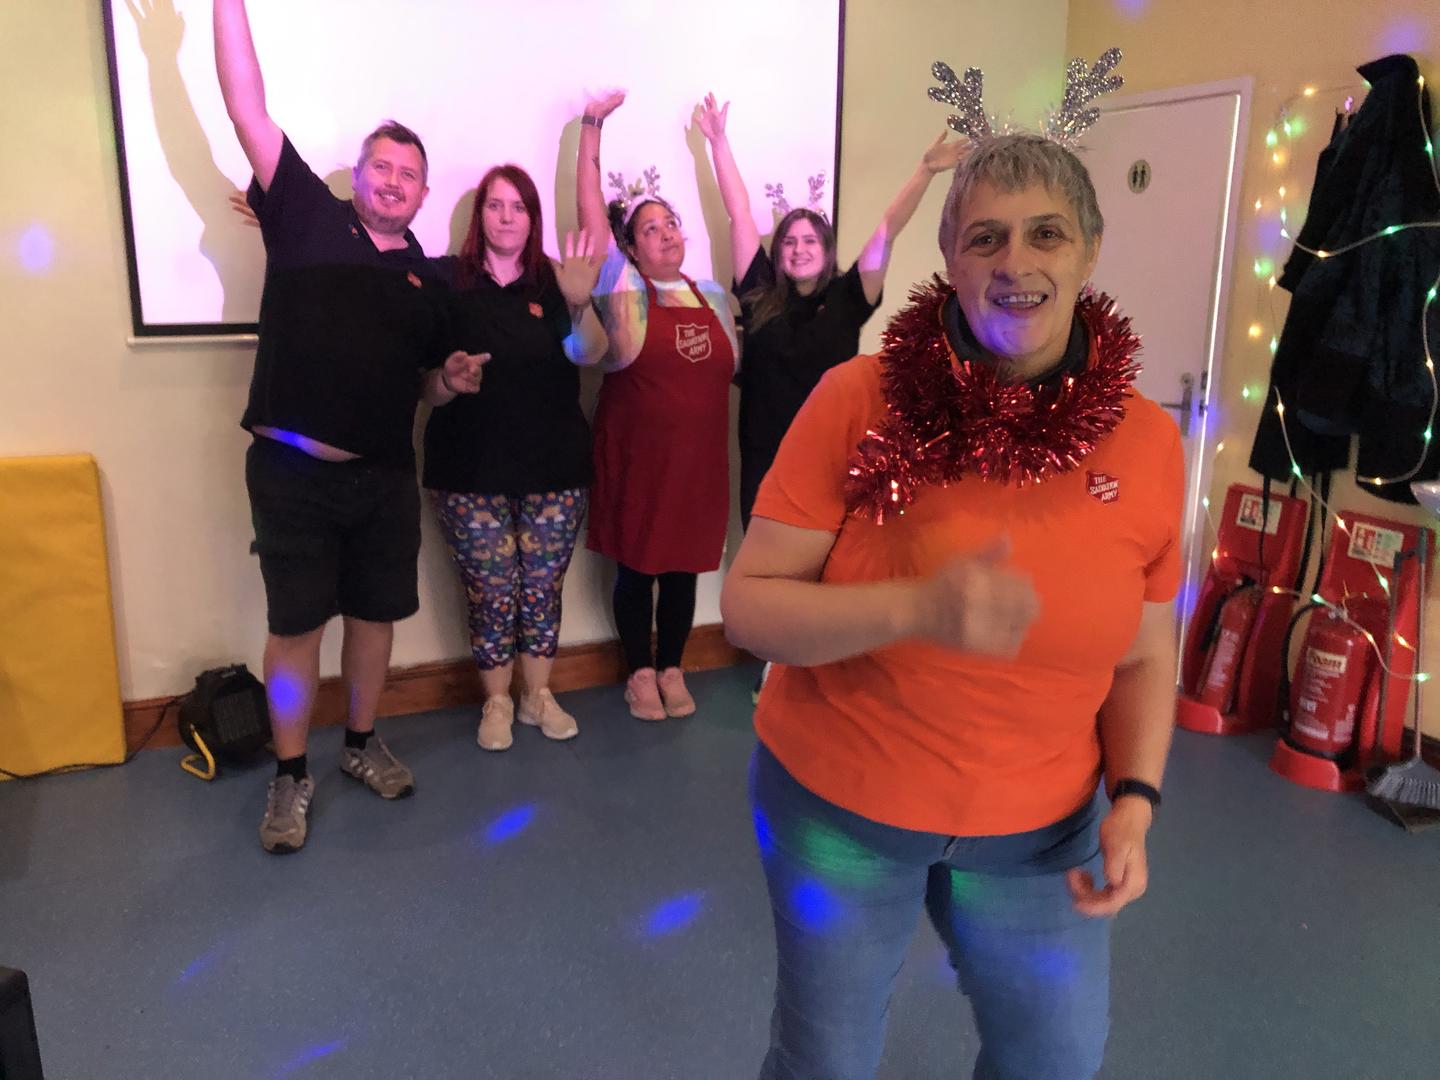 24 hour danceathon challenge to raise funds for Christmas